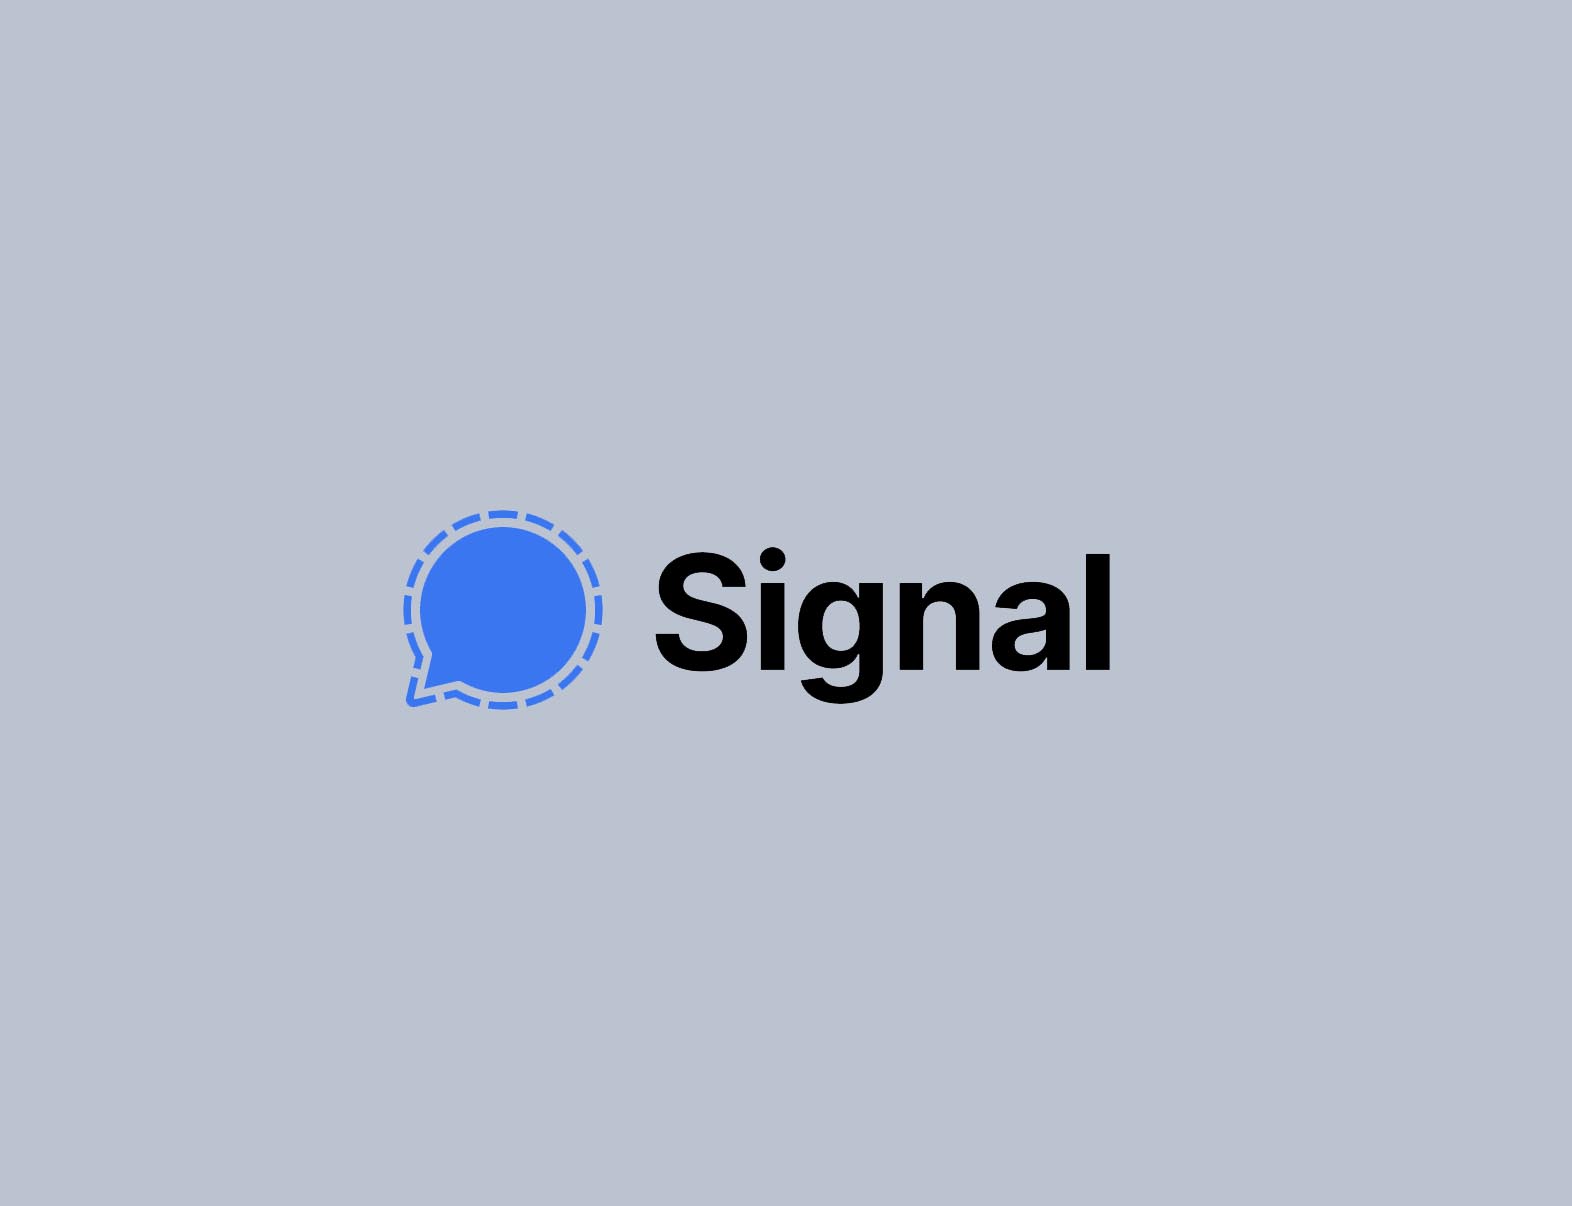 Signal is back after a blackout that lasted more than 24 hours